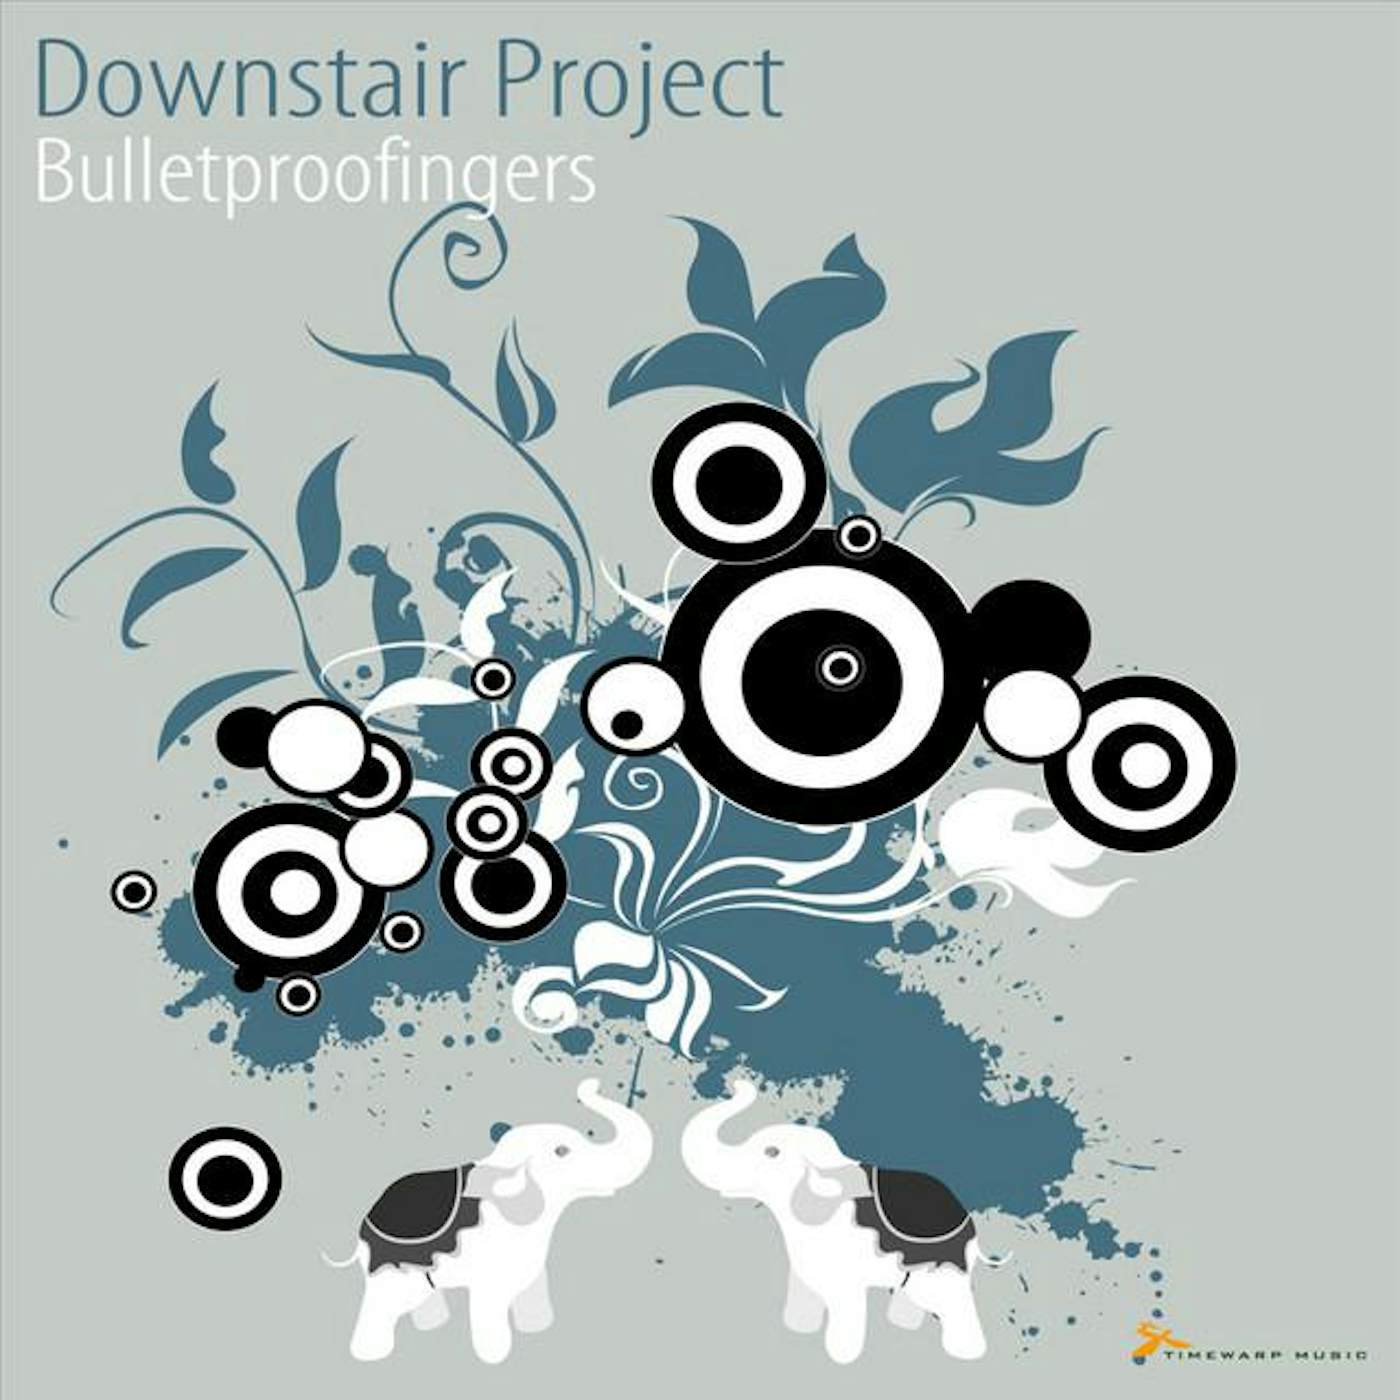 Downstair Project